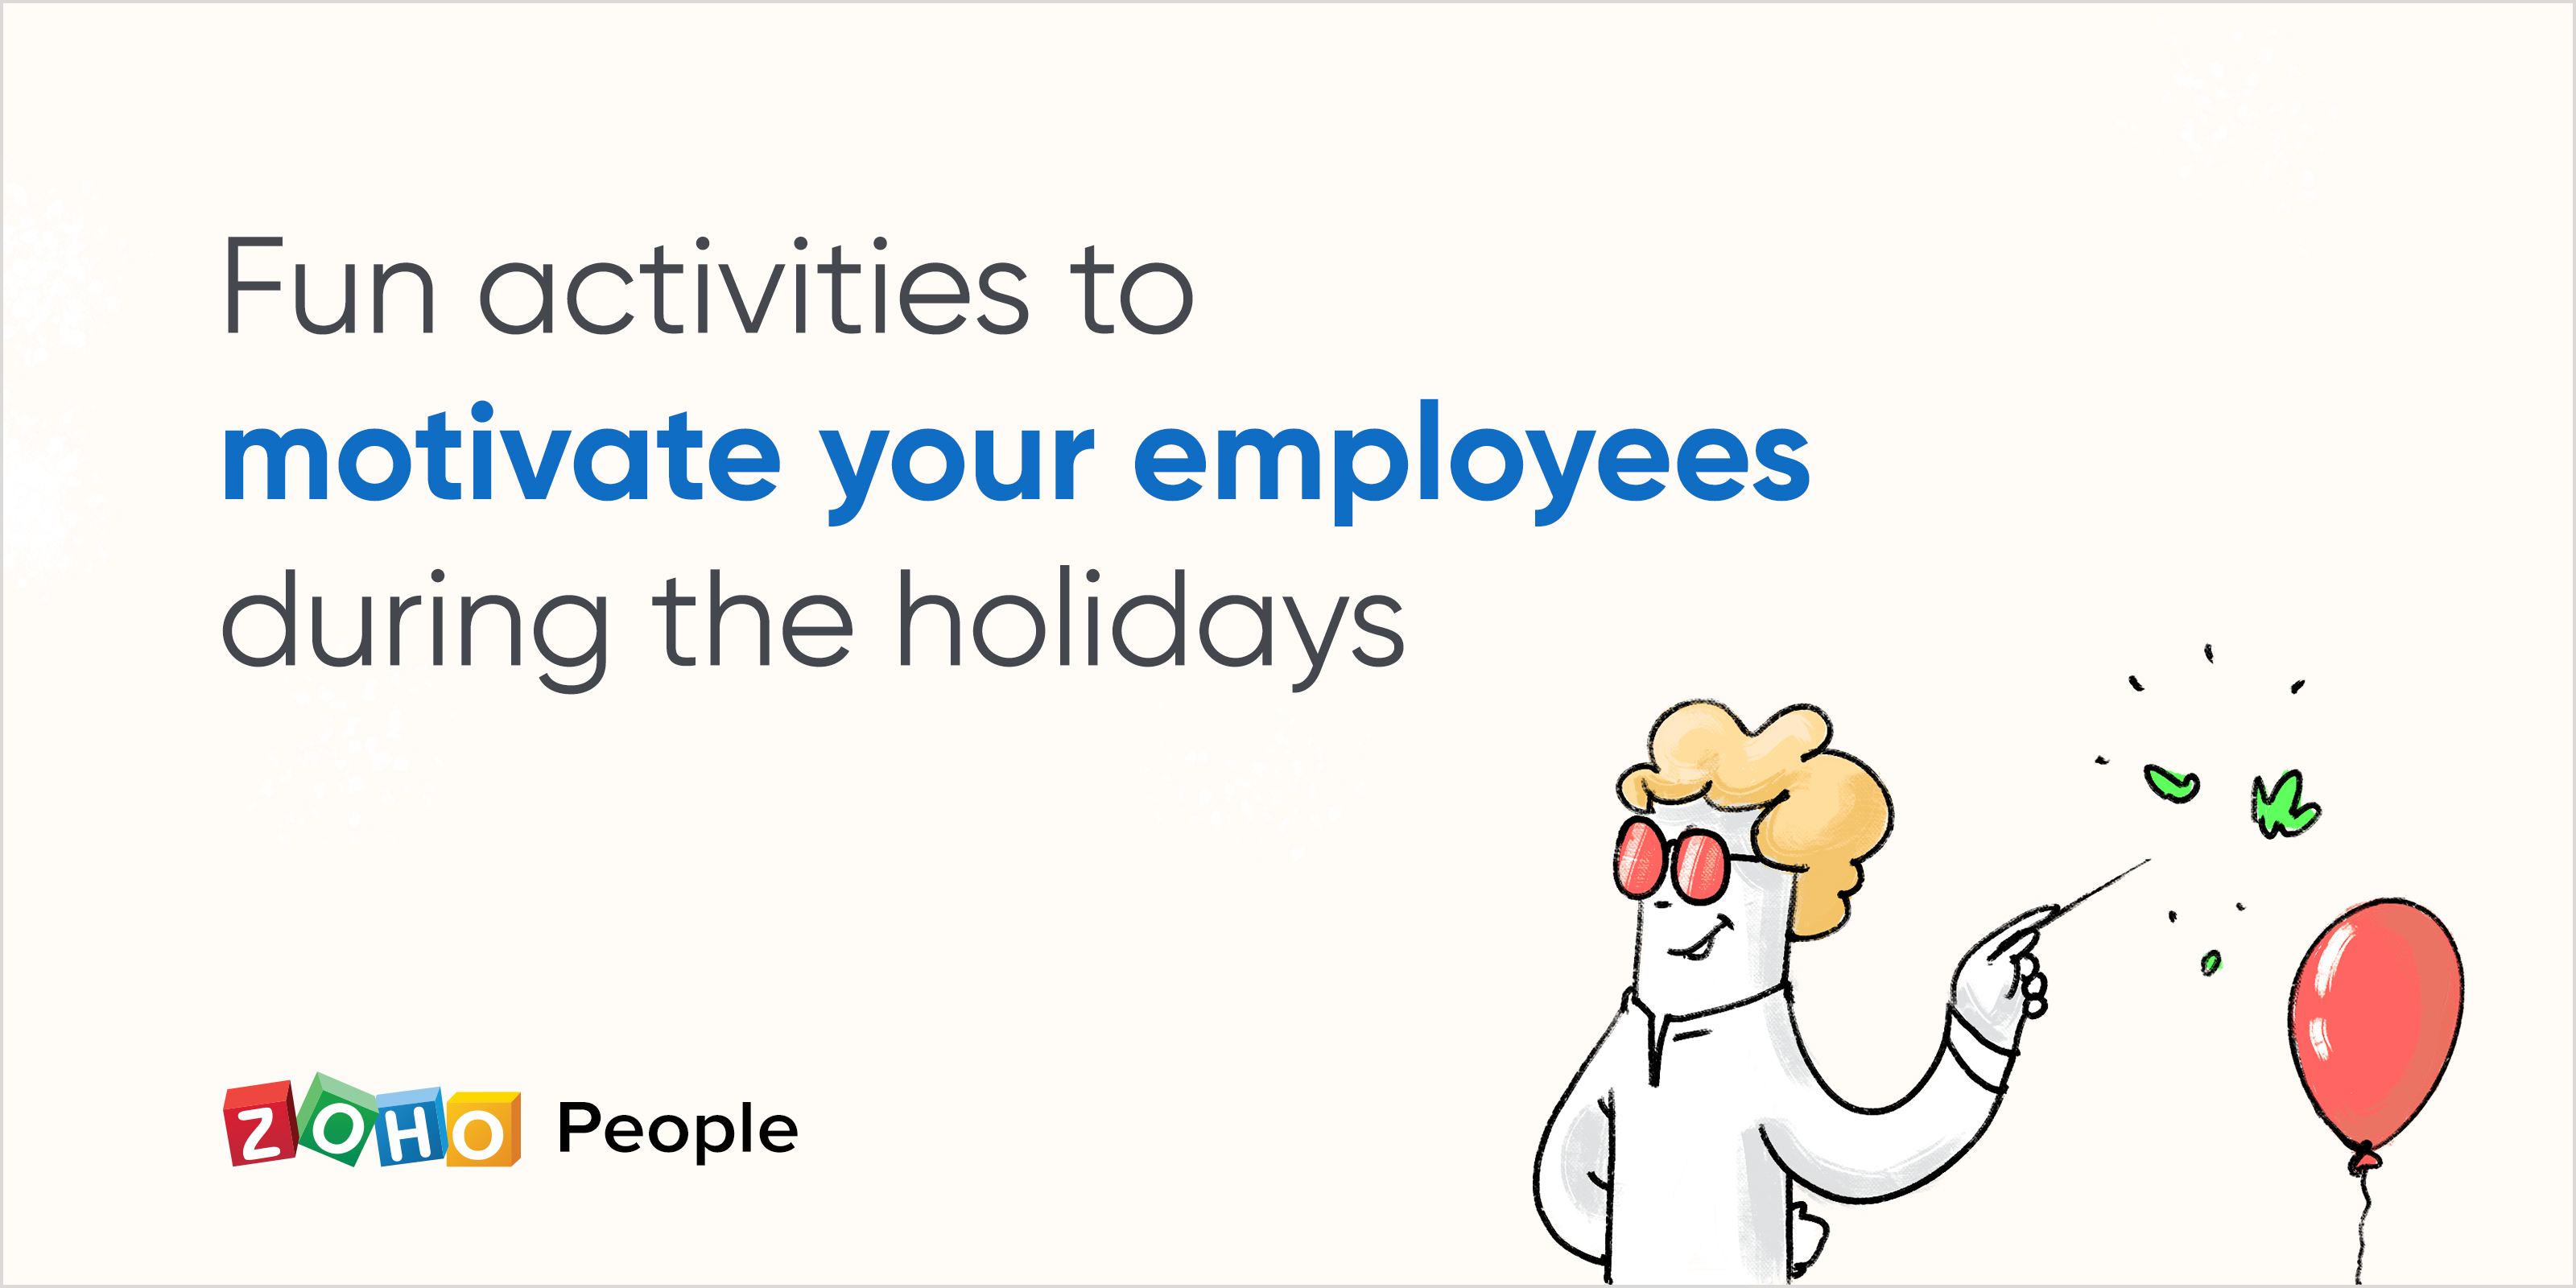 10 fun activities to motivate your employees during the holidays